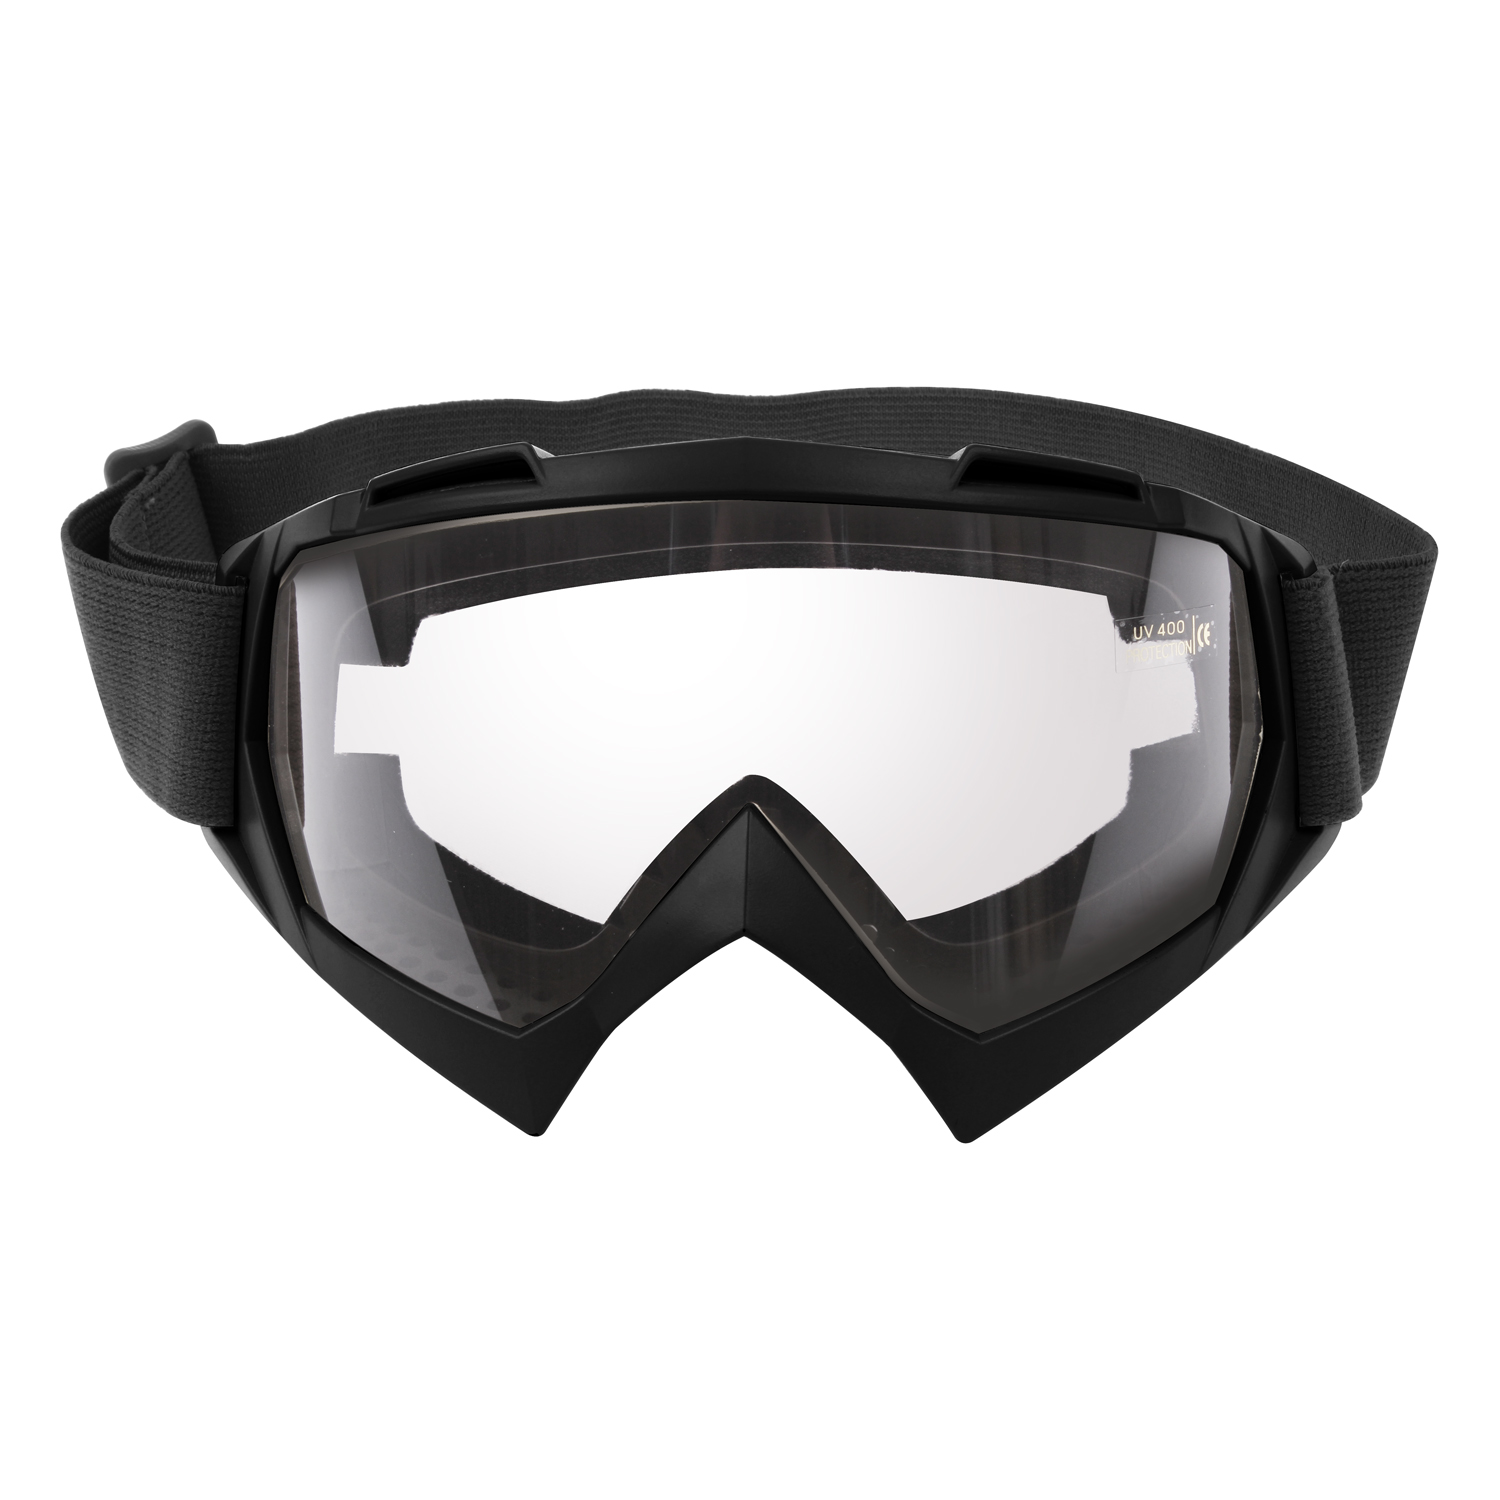 Rothco OTG Tactical Goggles - Over the Glasses